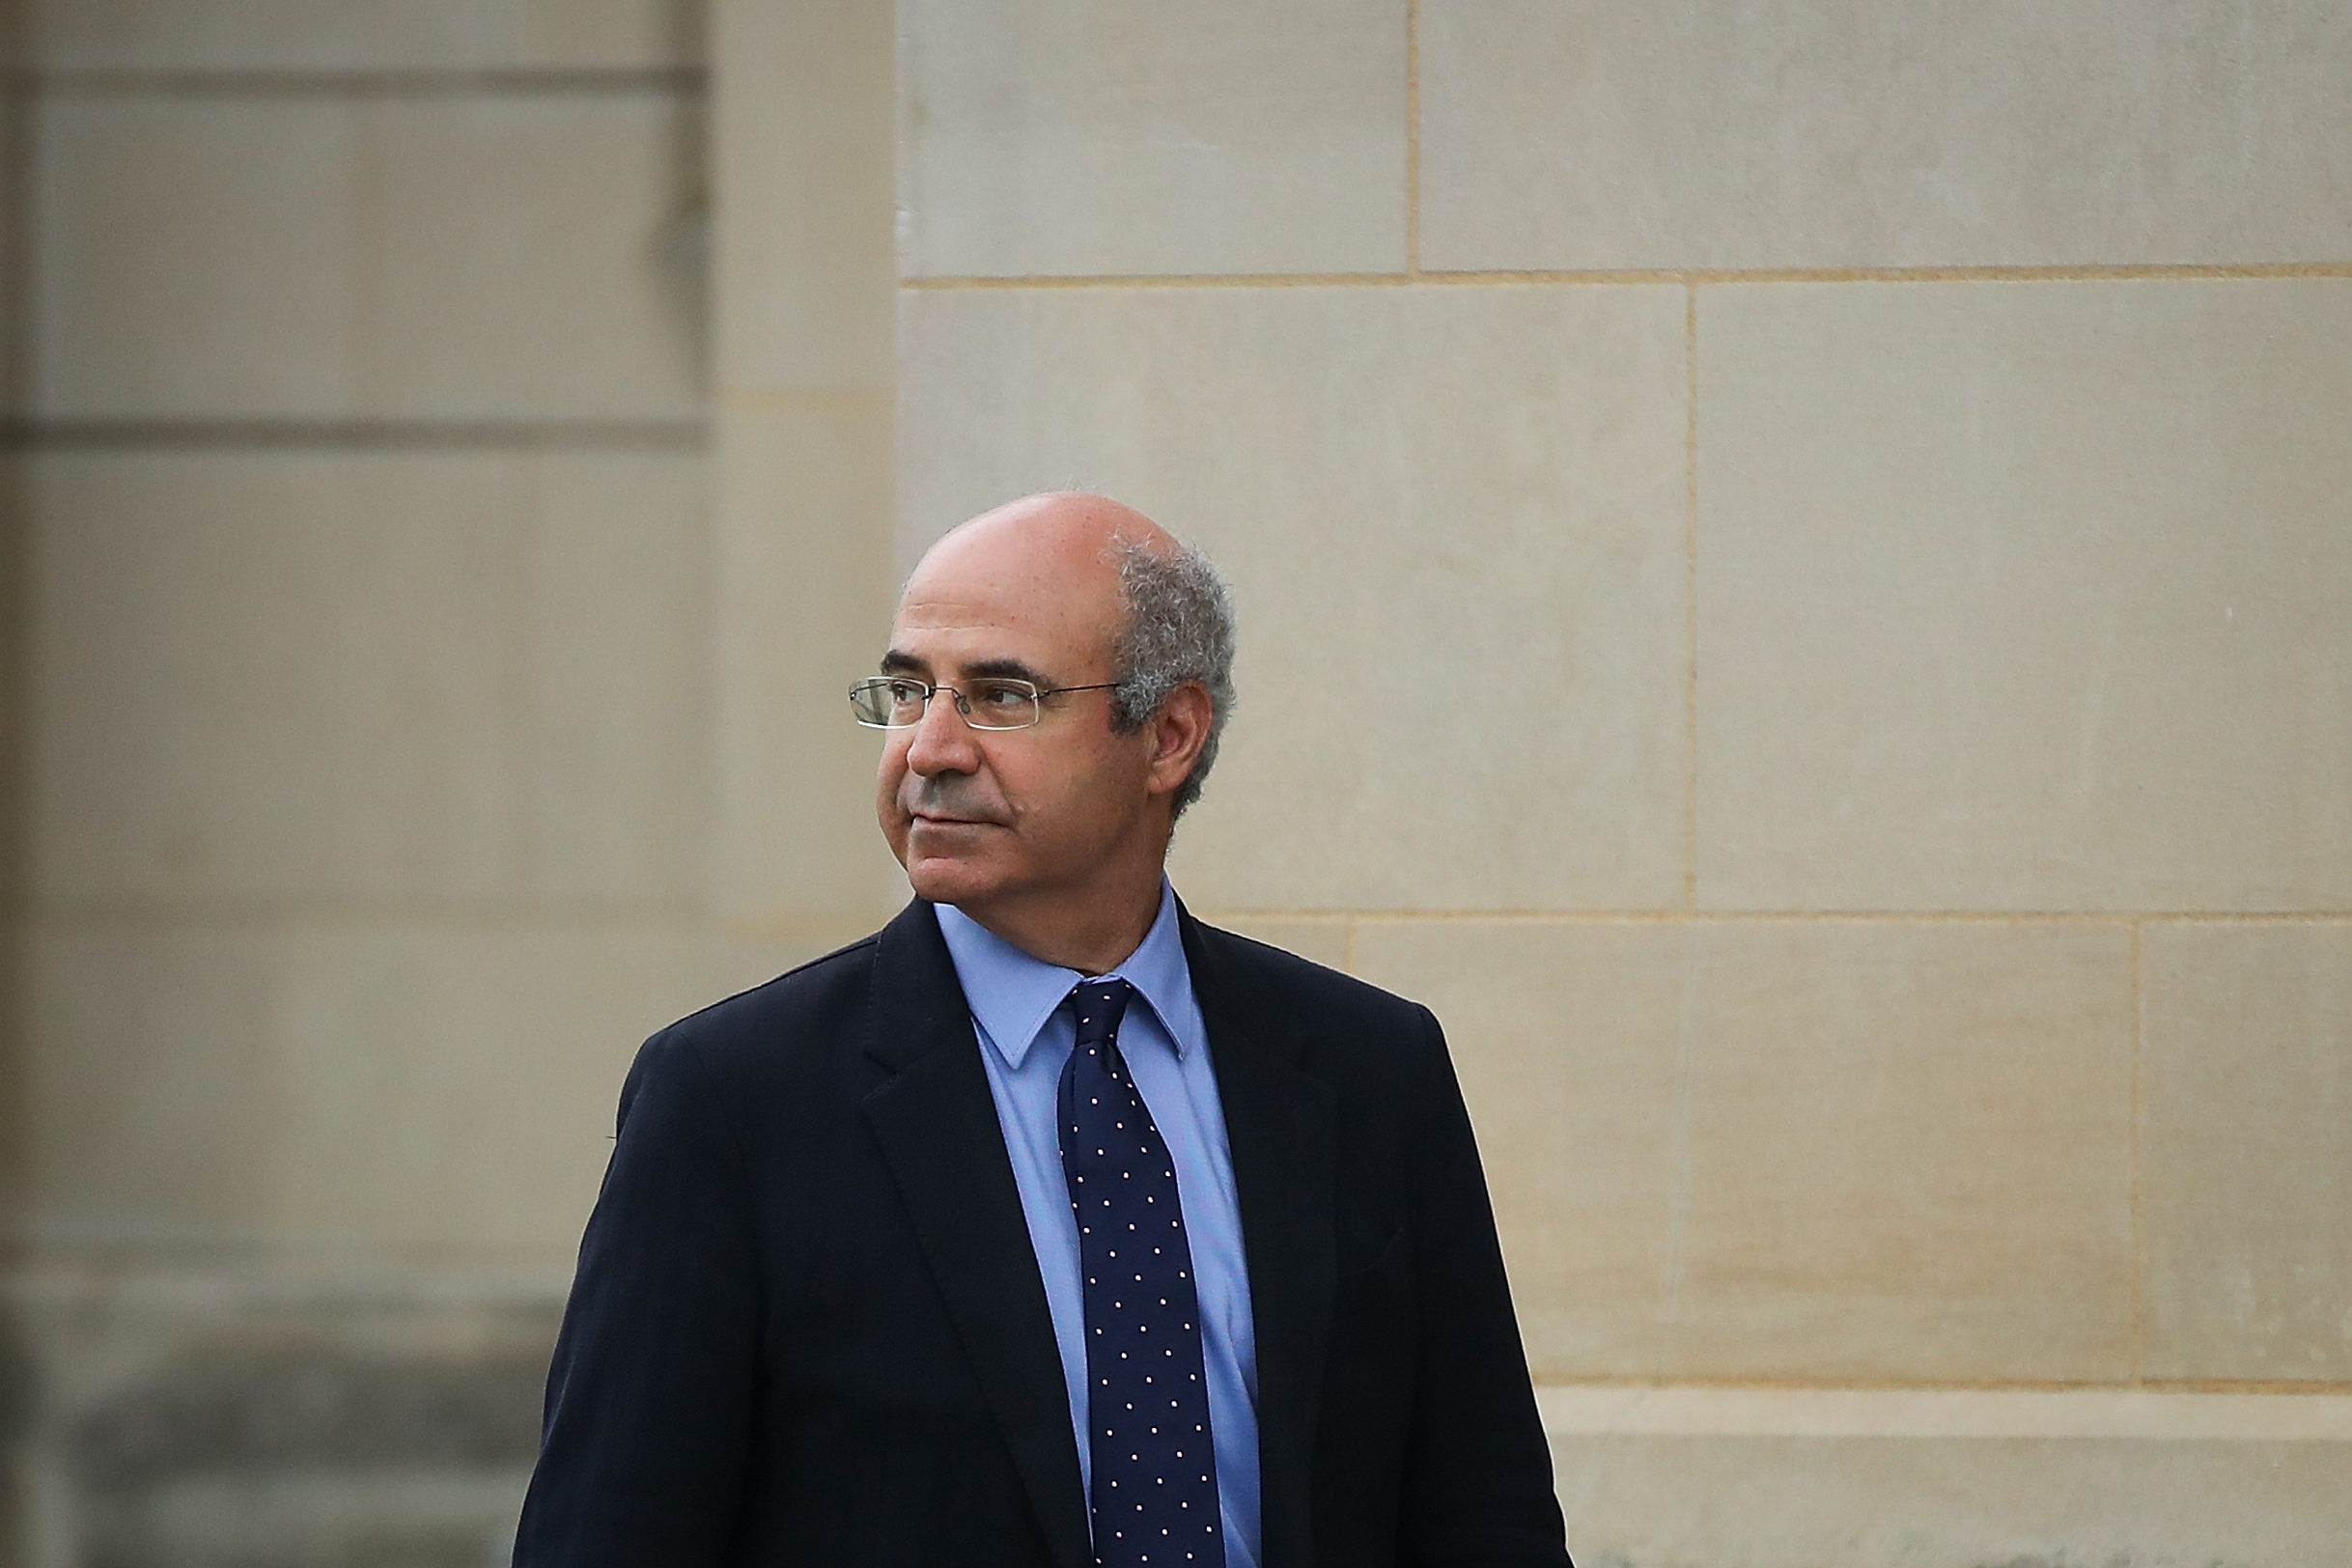 PHOTO: William 'Bill' Browder, hedge fund manager and human rights activist, arrives at the Washington National Cathedral for the funeral service for the late Senator John McCain, Sept. 1, 2018, in Washington, D.C.